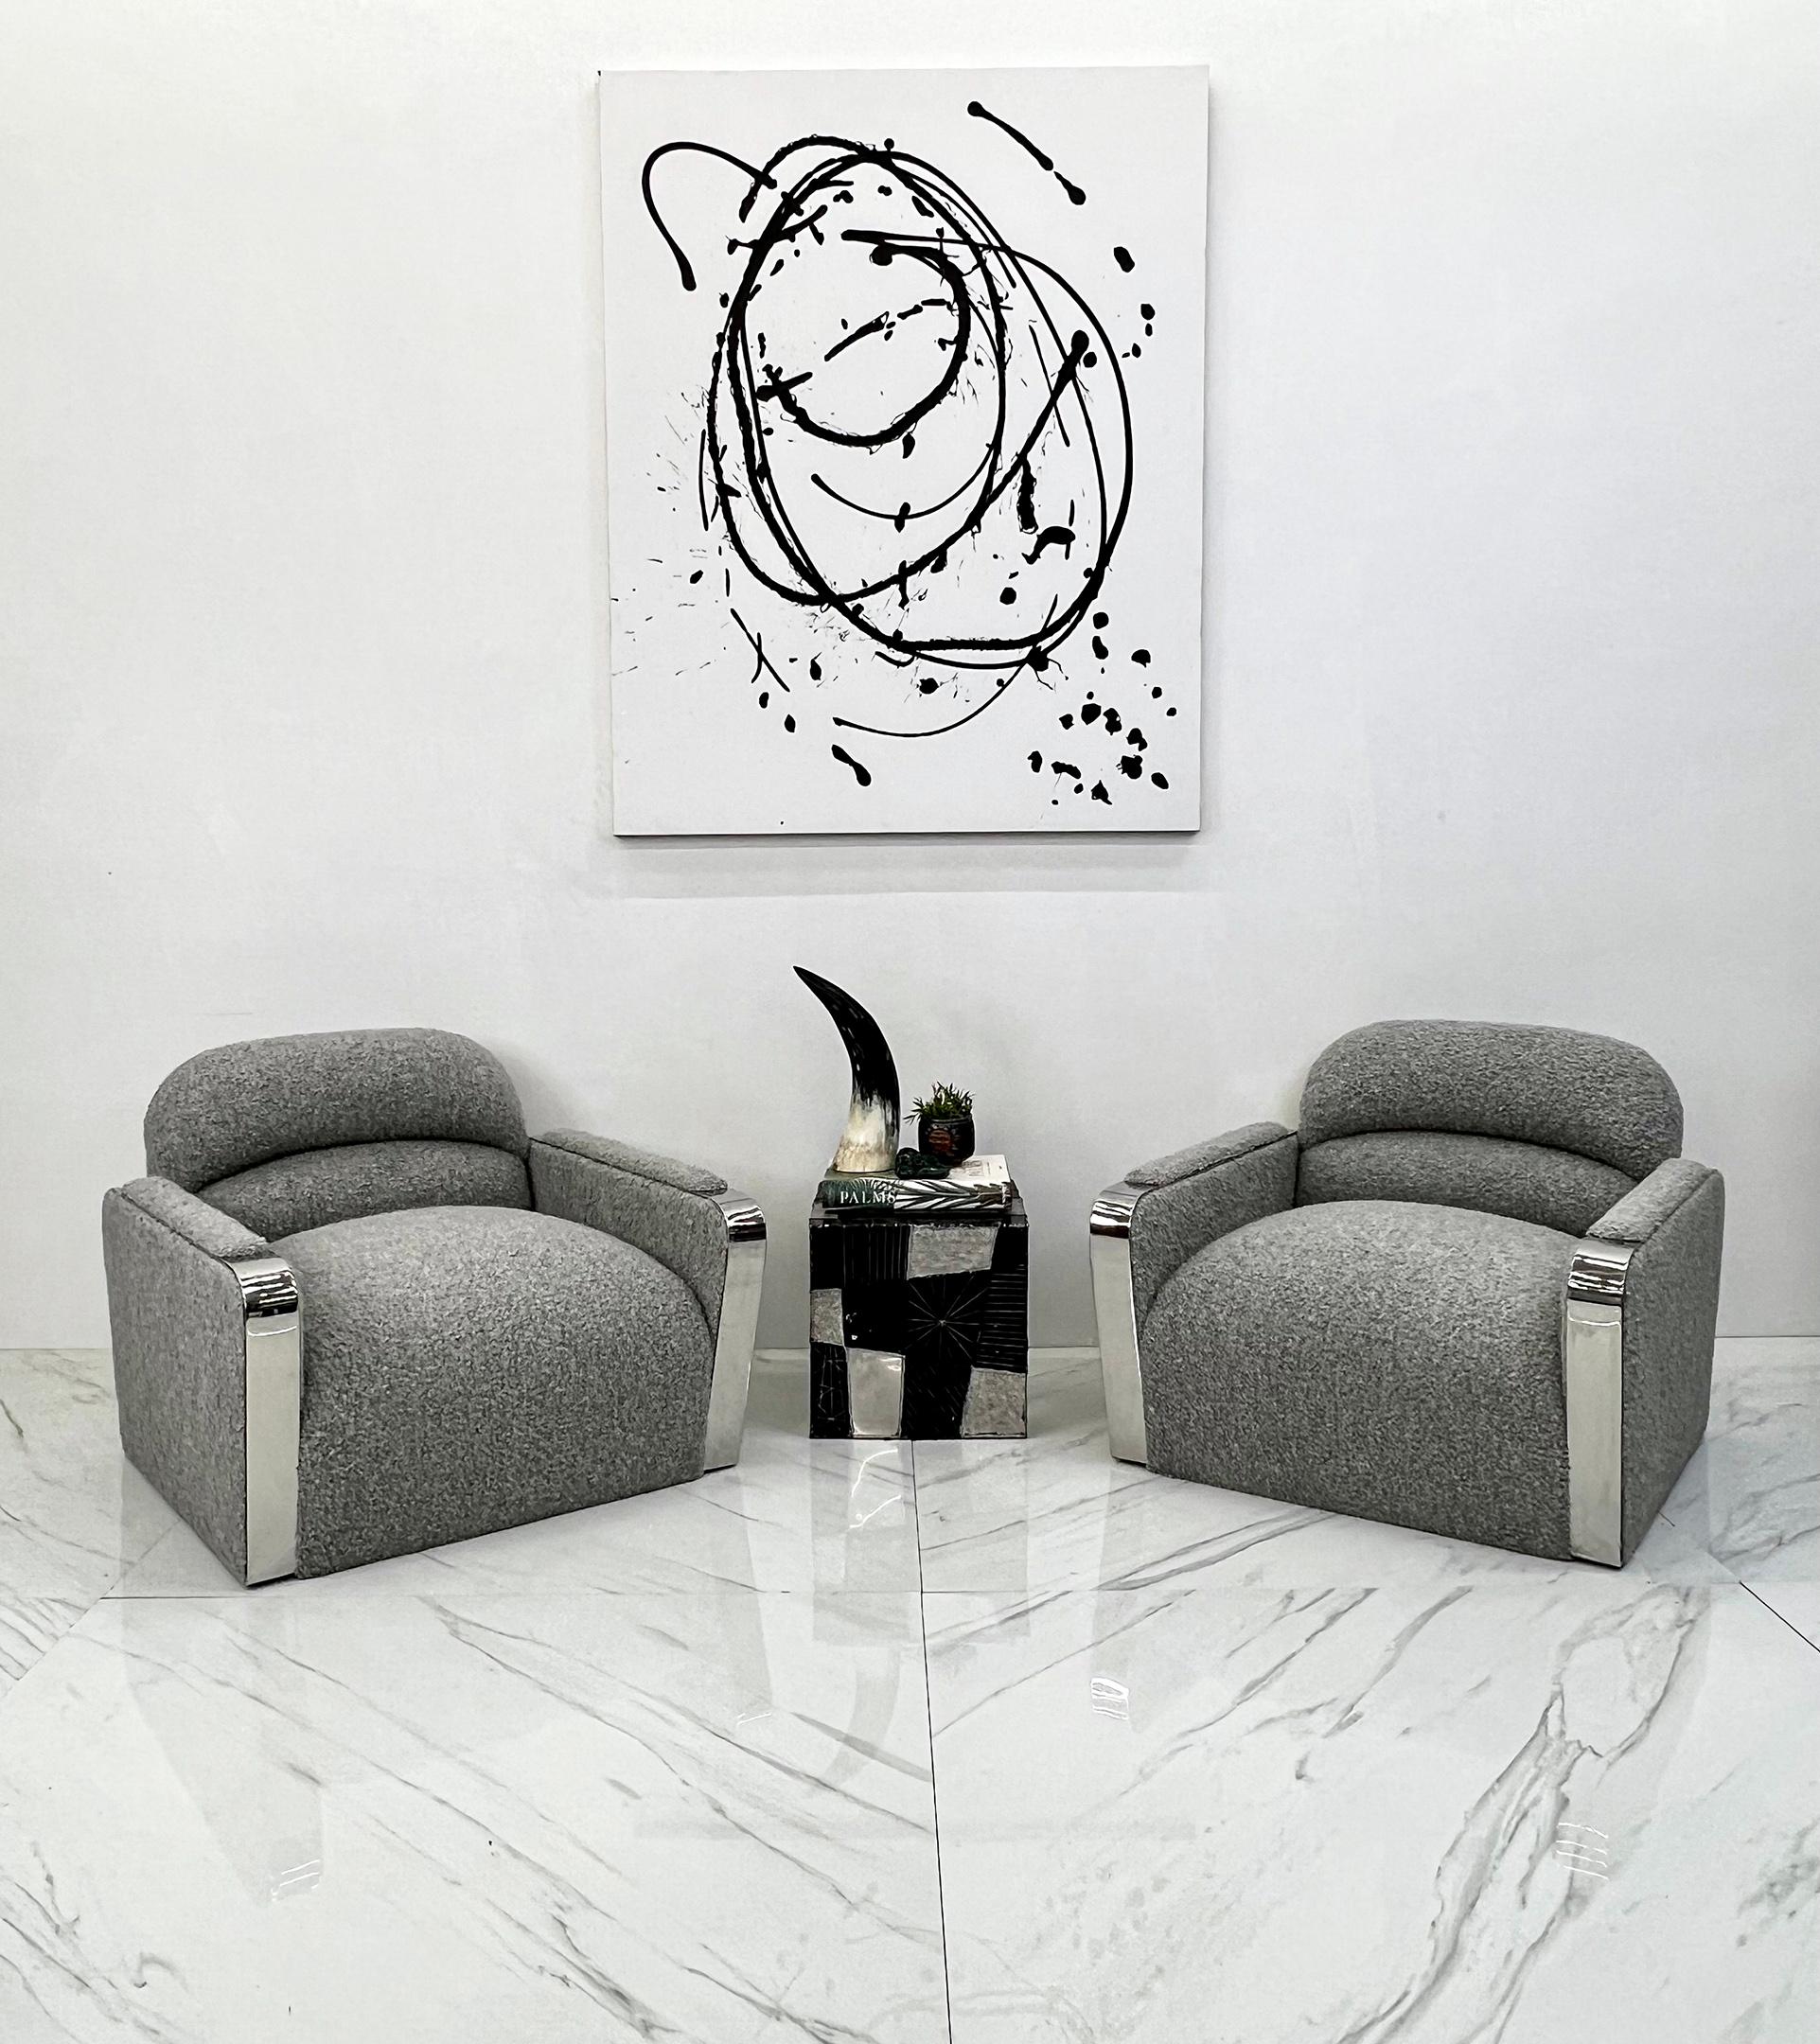 These lounge chairs are absolutely stunning! A Pair of Iconic Lounge Chairs by Stanley Jay Friedman for Brueton: A Tribute to Postmodern Art Deco Luxury

Transport yourself back to the opulent design era of 1979, where the creative genius of Stanley